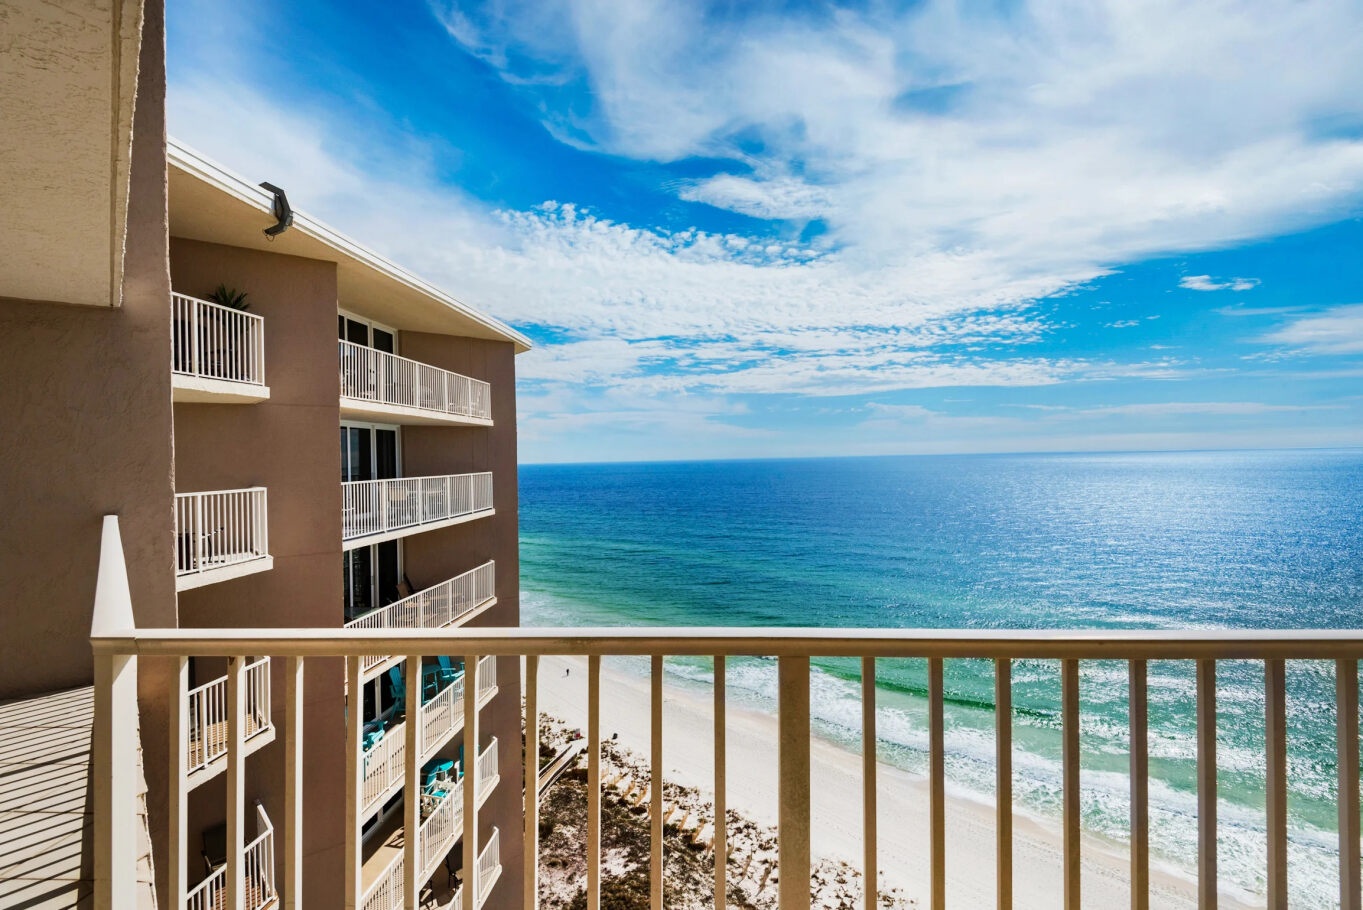 Enjoy stunning ocean views from your very own private balcony